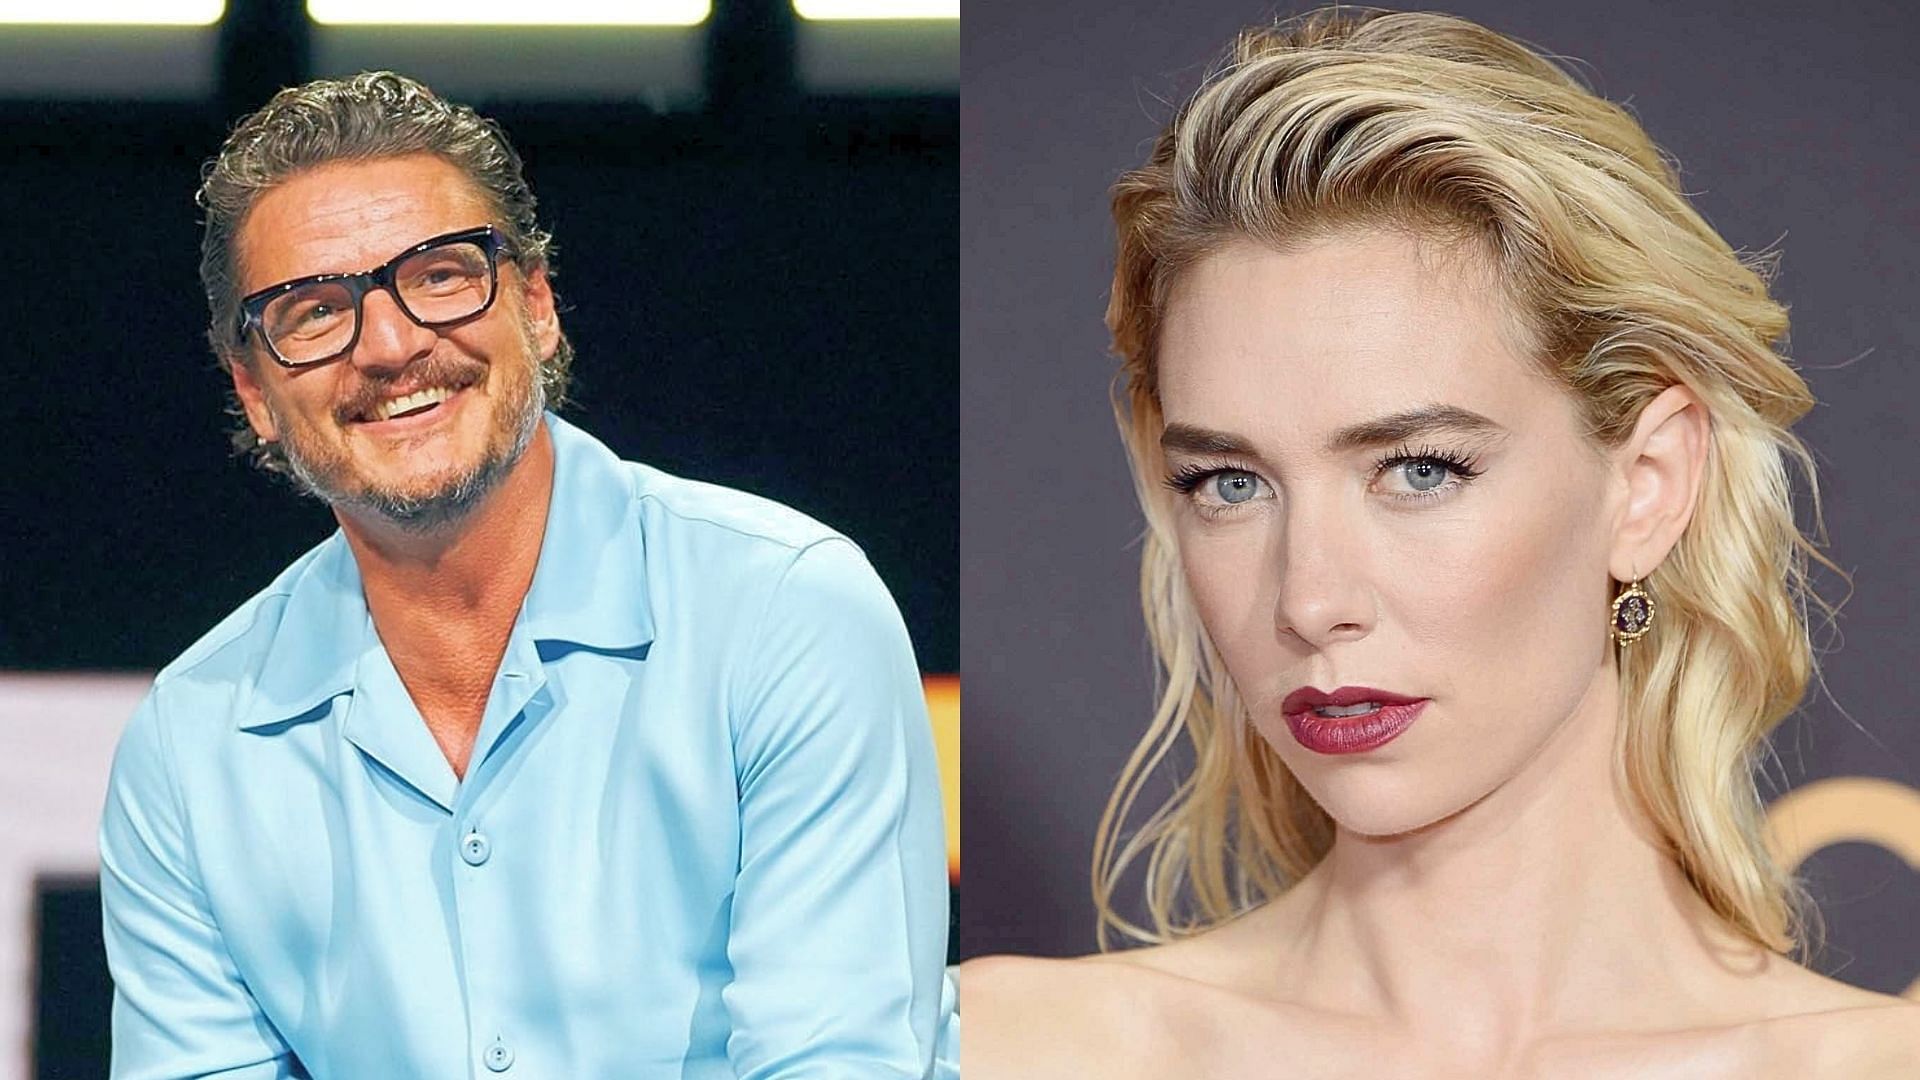 Pedro Pascal (L) and Vanessa Kirby )R) will be part of Marvel